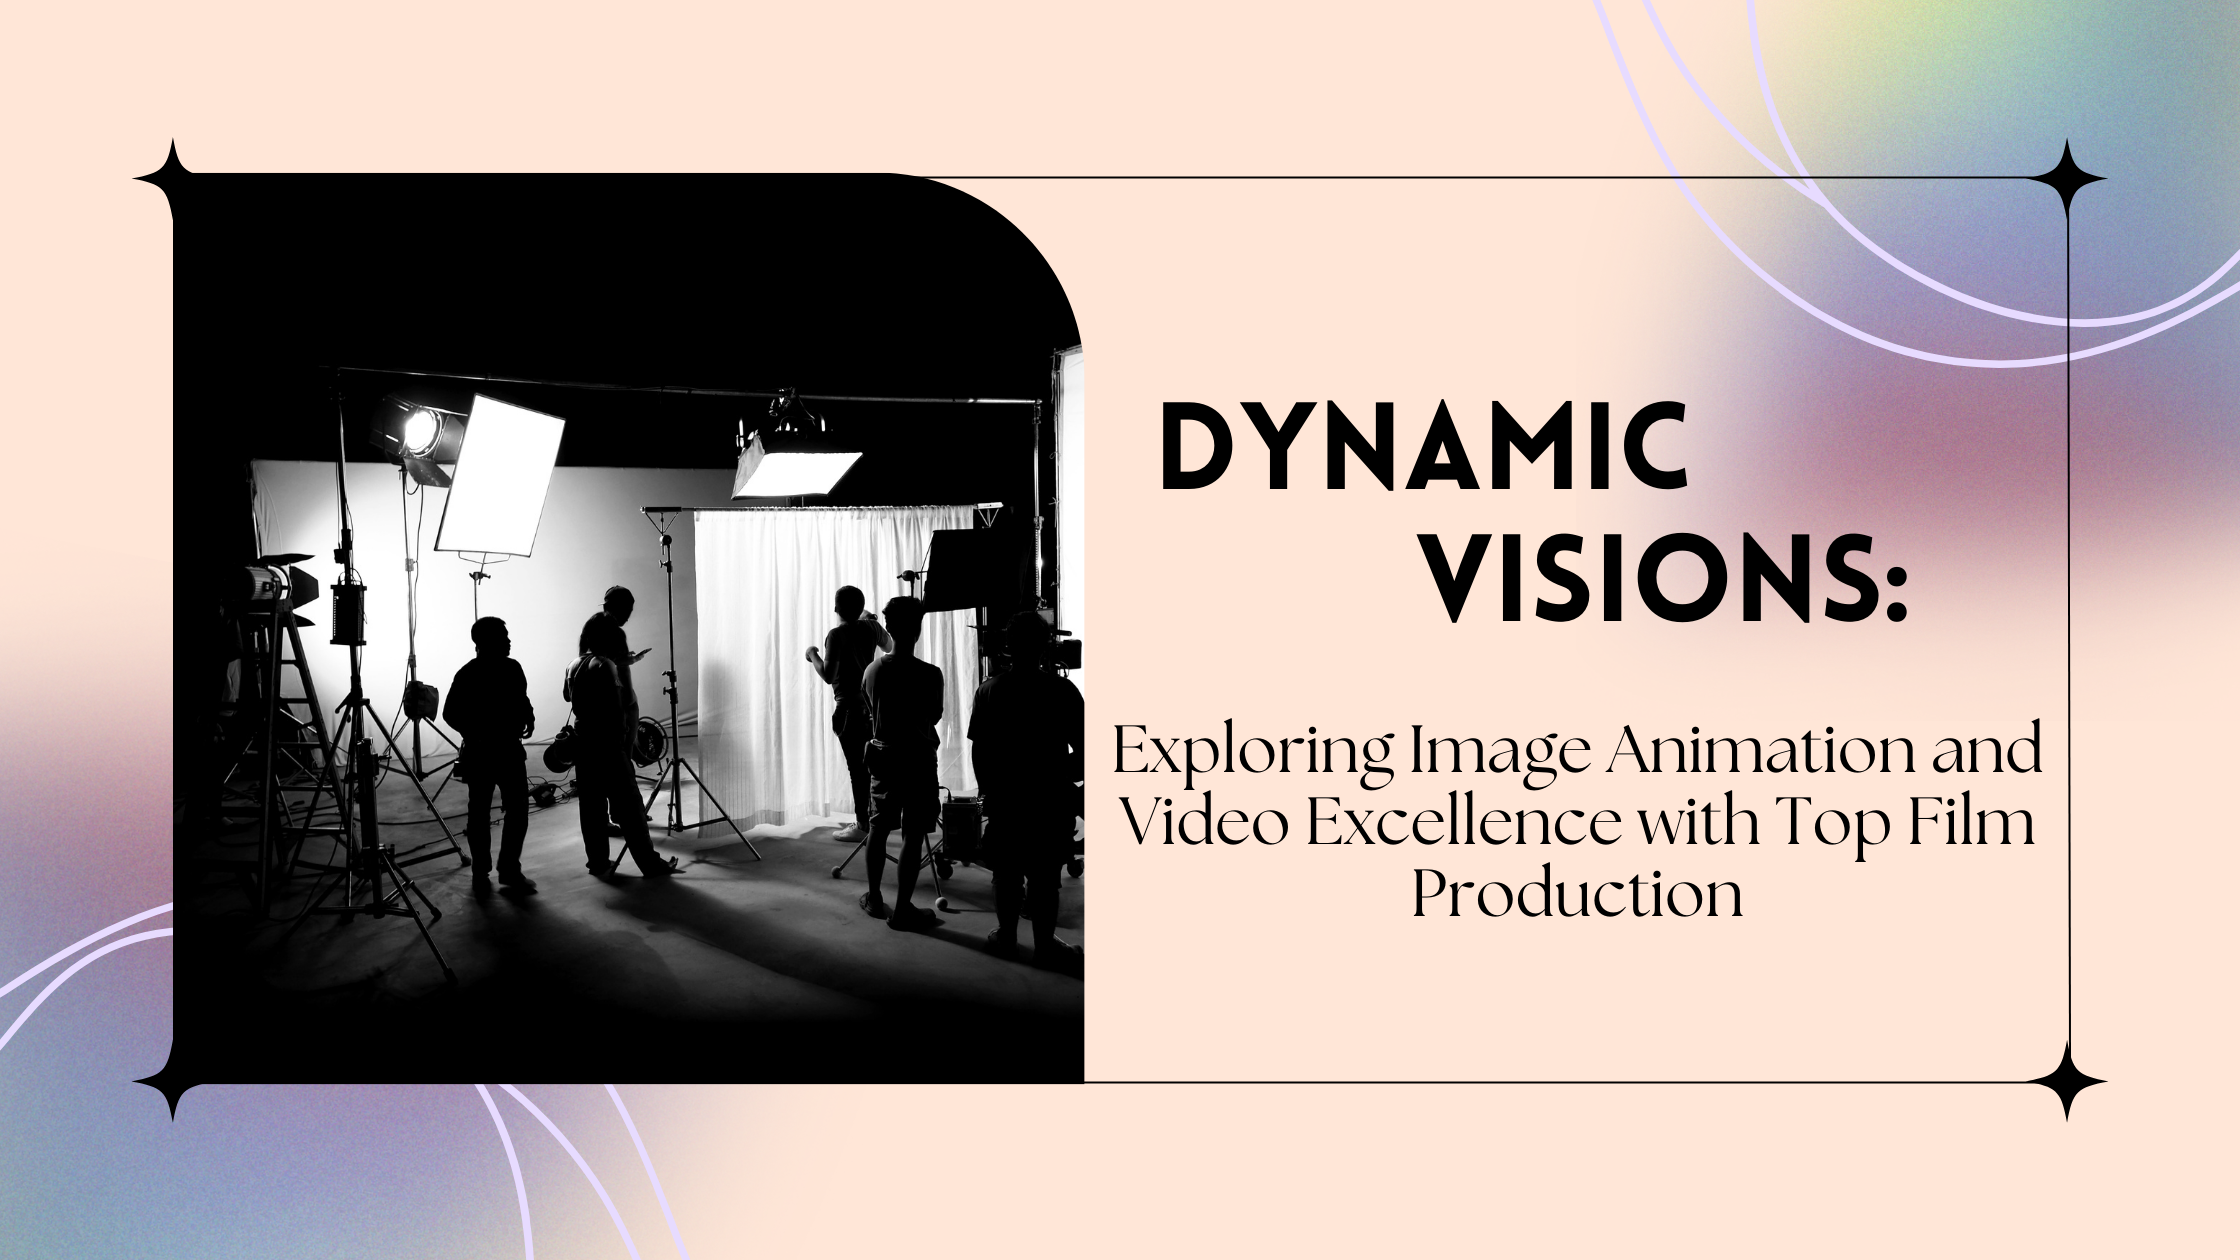 Dynamic Visions: Exploring Image Animation and Video Excellence with Top Film Production